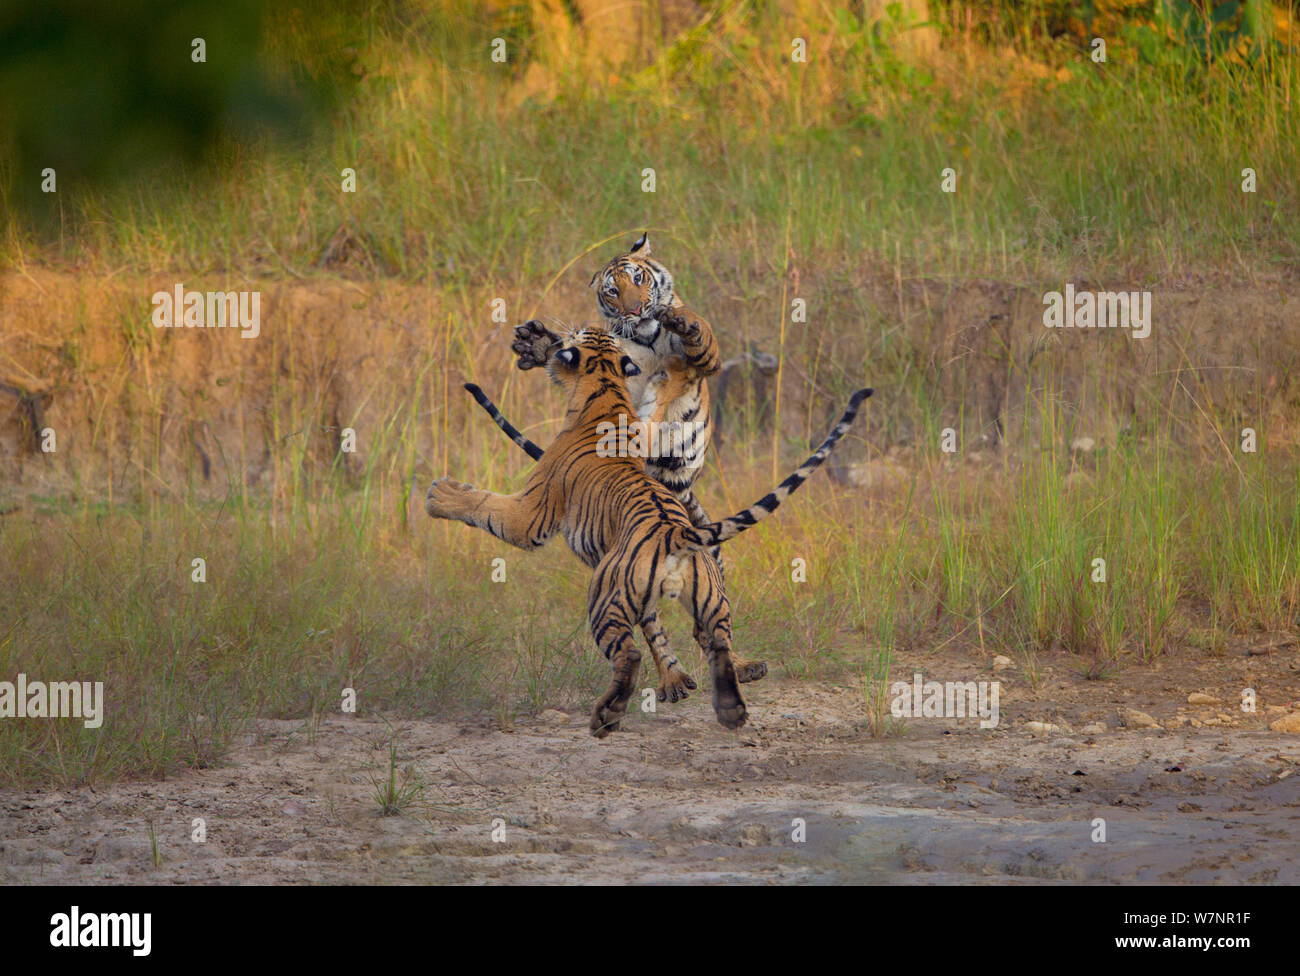 Bengal Tigers (Panthera tigris), two subadults, approximately 17-19 months old, leaping, playing and fighting. Endangered. Bandhavgarh National Park, India. Non-ex. Sequence 1 of 2. Stock Photo